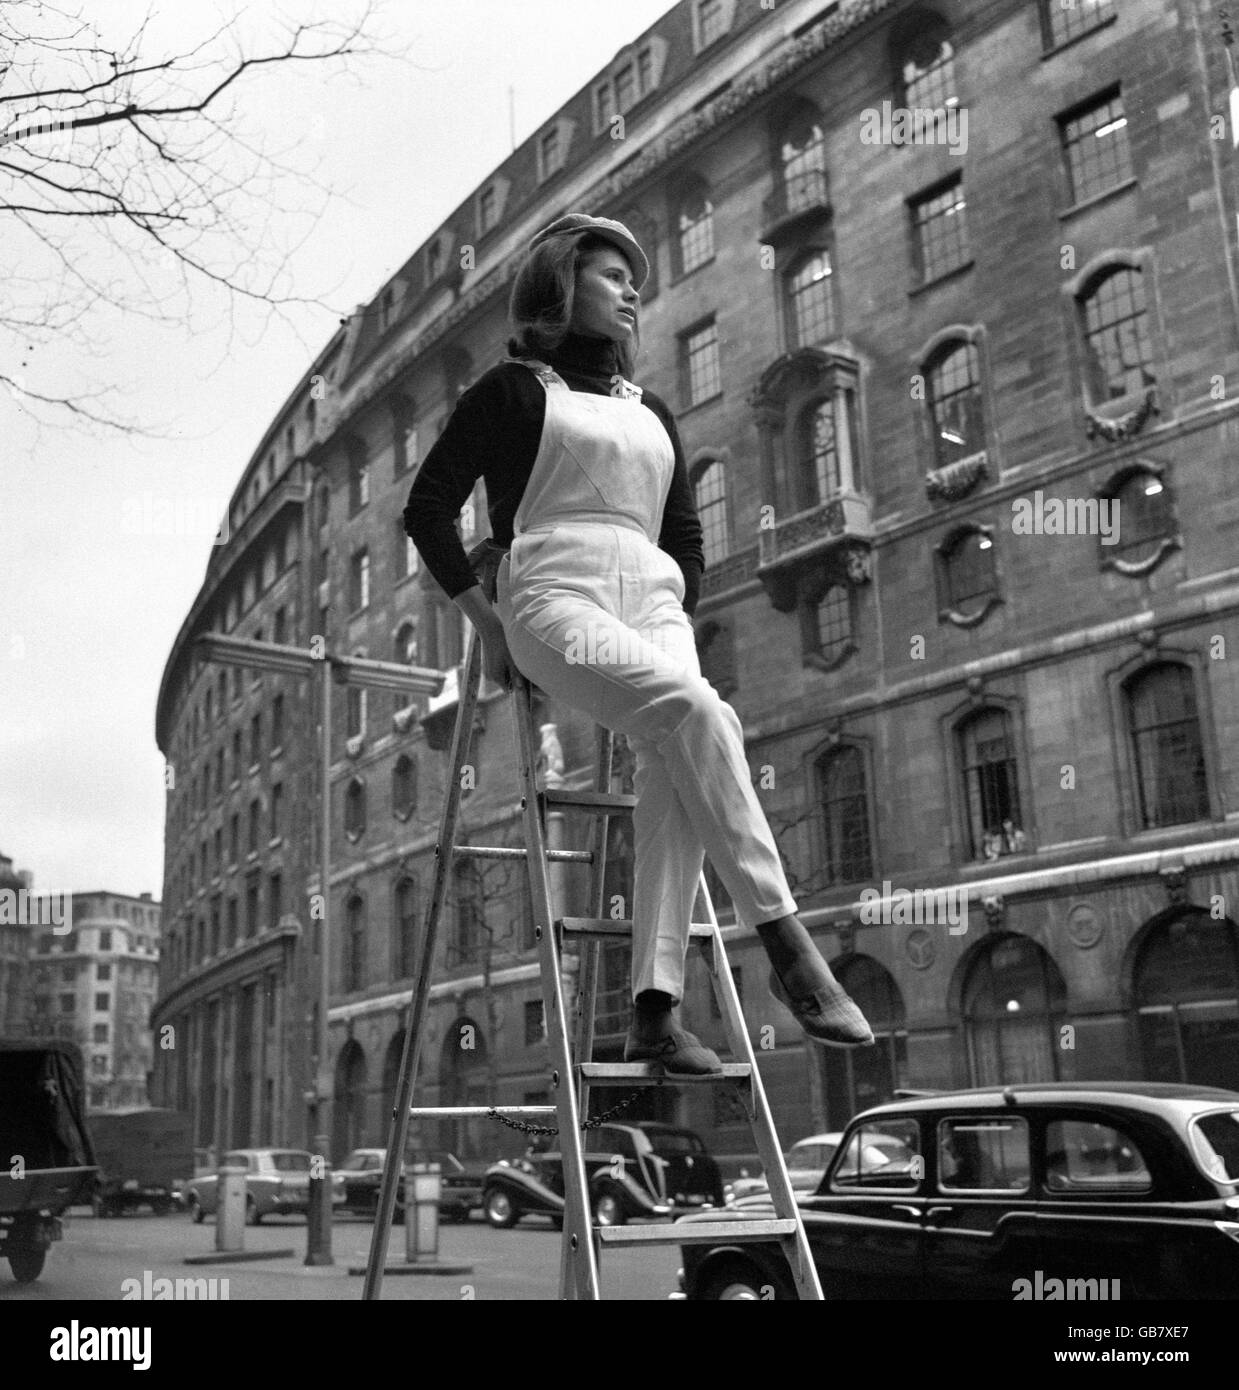 Up a ladder wearing the latest in bib and brace overalls is Suzanne Kennedy in The Aldwych, London. The new overalls are by Lybro of Liverpool. Stock Photo